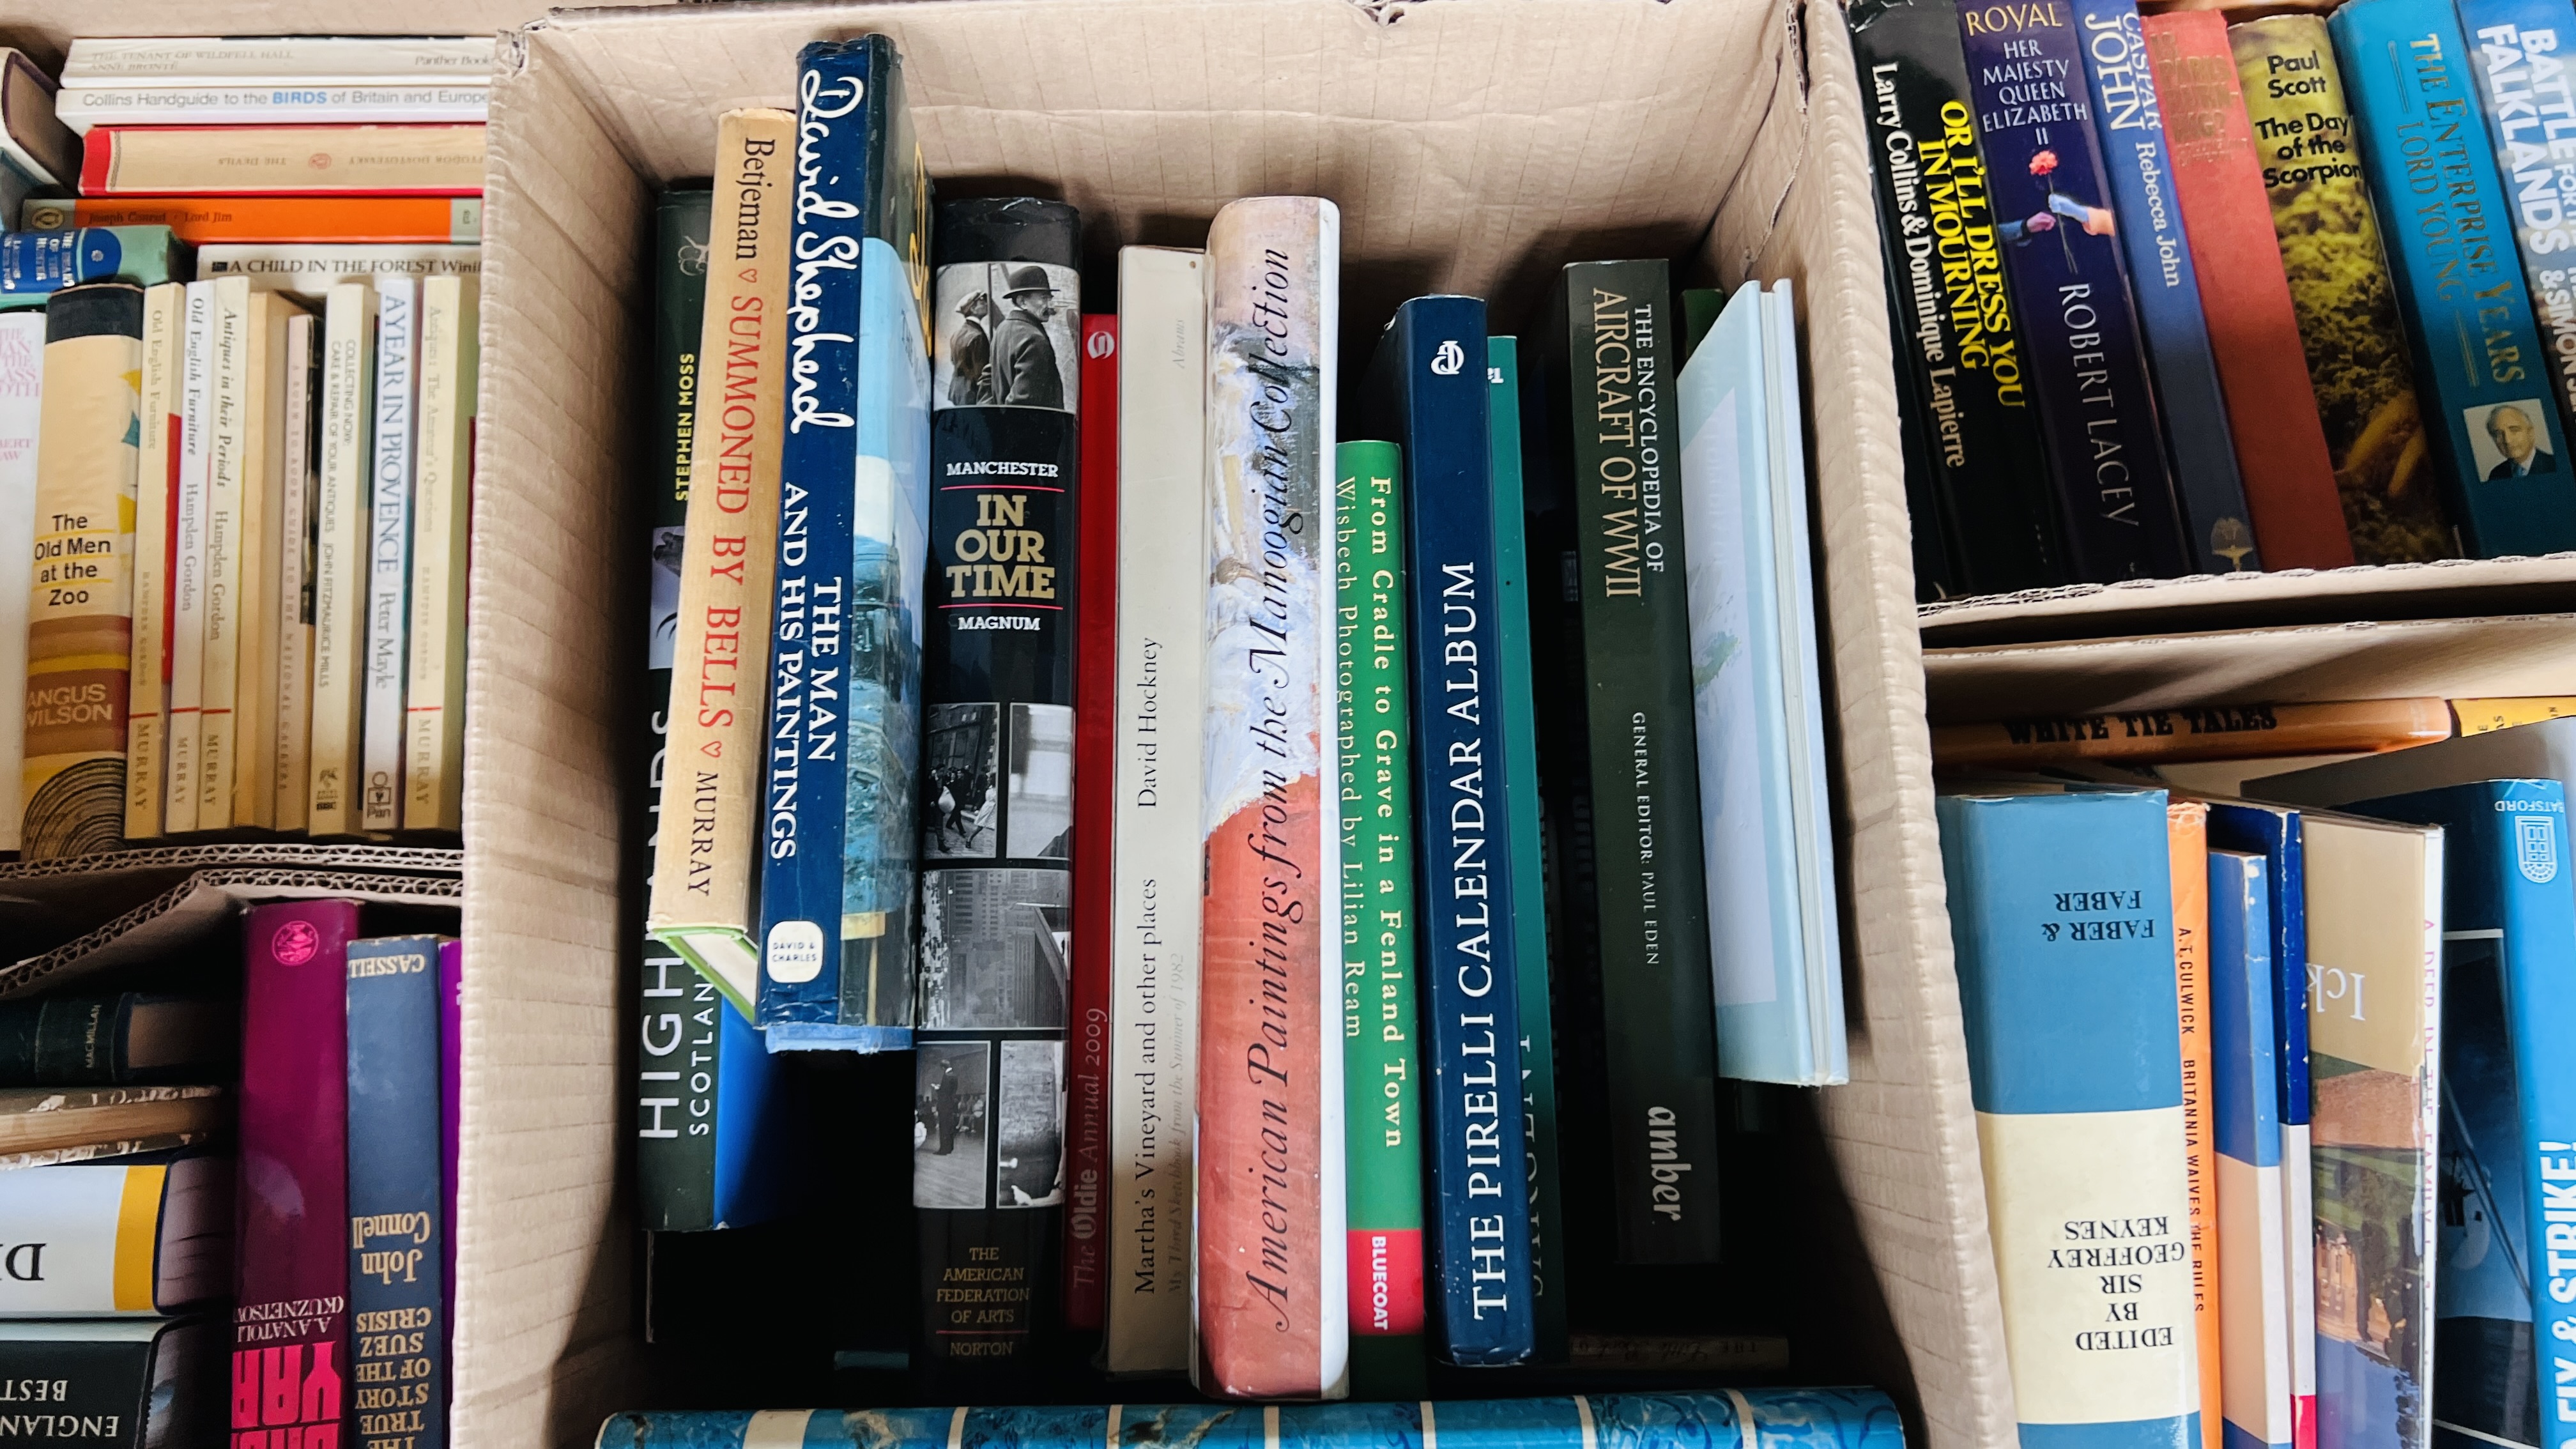 23 BOXES OF ASSORTED BOOKS - AS CLEARED TO INCLUDE NOVELS AND REFERENCE. - Image 7 of 24